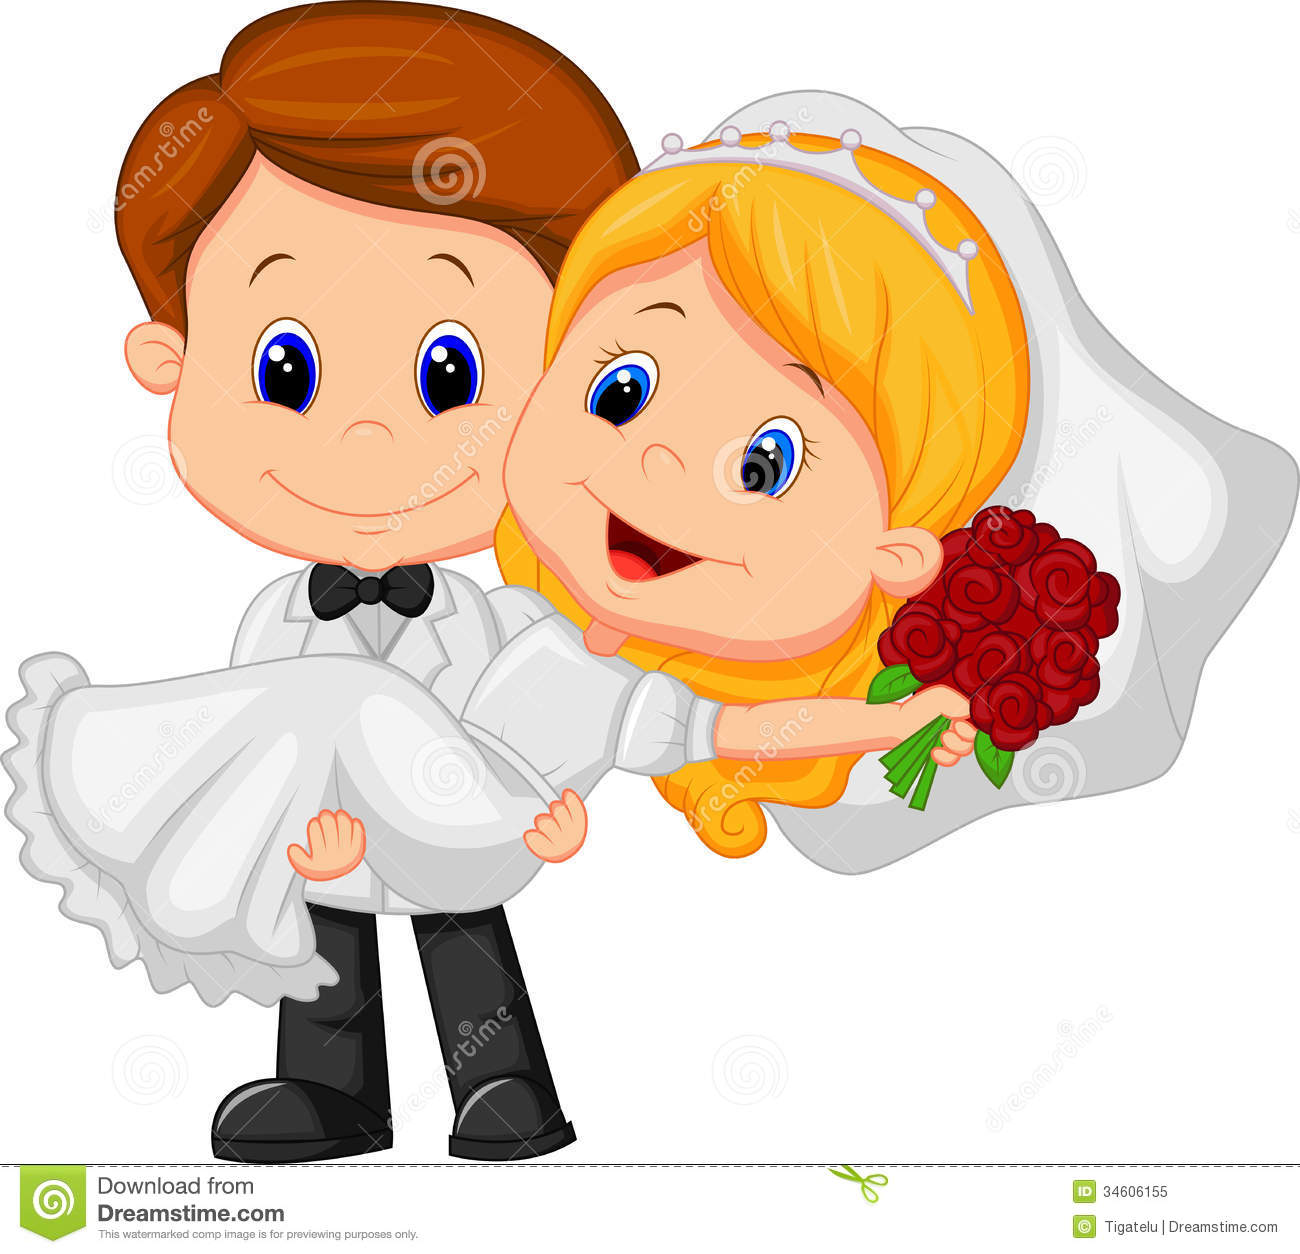 Bride and groom clipart 3 ... a76799a6dd6a3cbc69ecf324211ee5 .